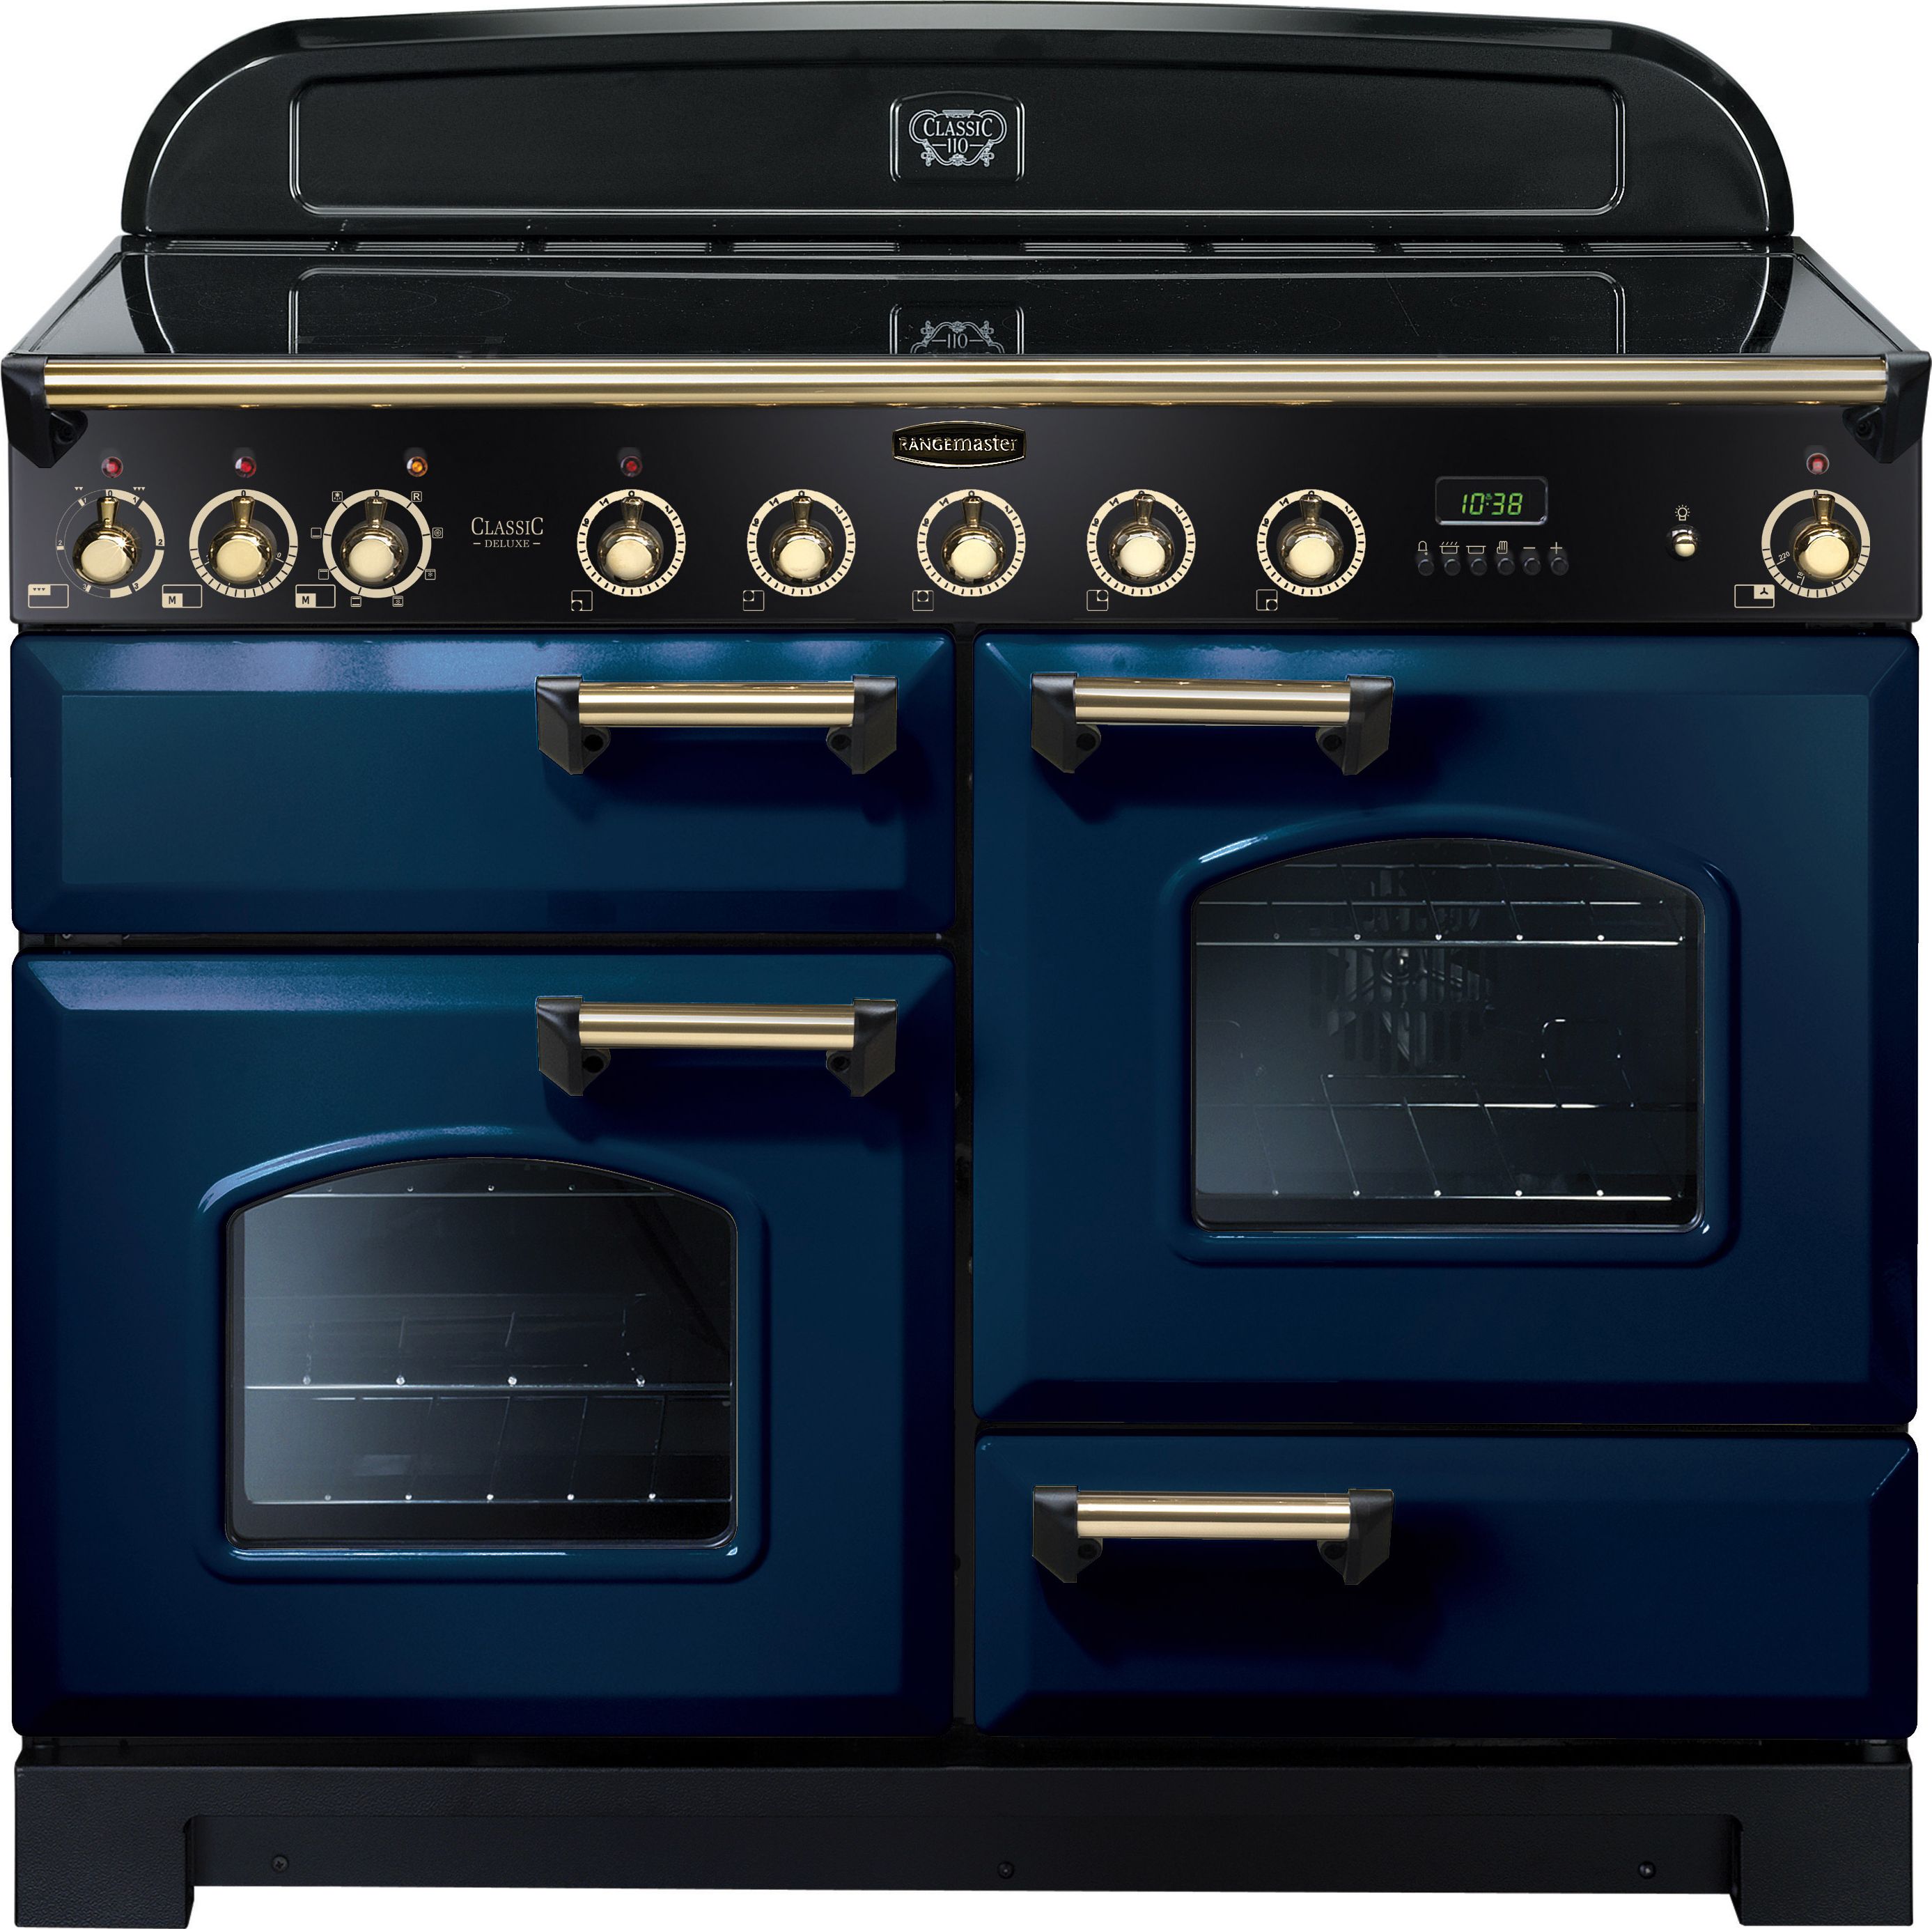 Rangemaster Classic Deluxe CDL110EIRB/B 110cm Electric Range Cooker with Induction Hob - Regal Blue / Brass - A/A Rated, Blue